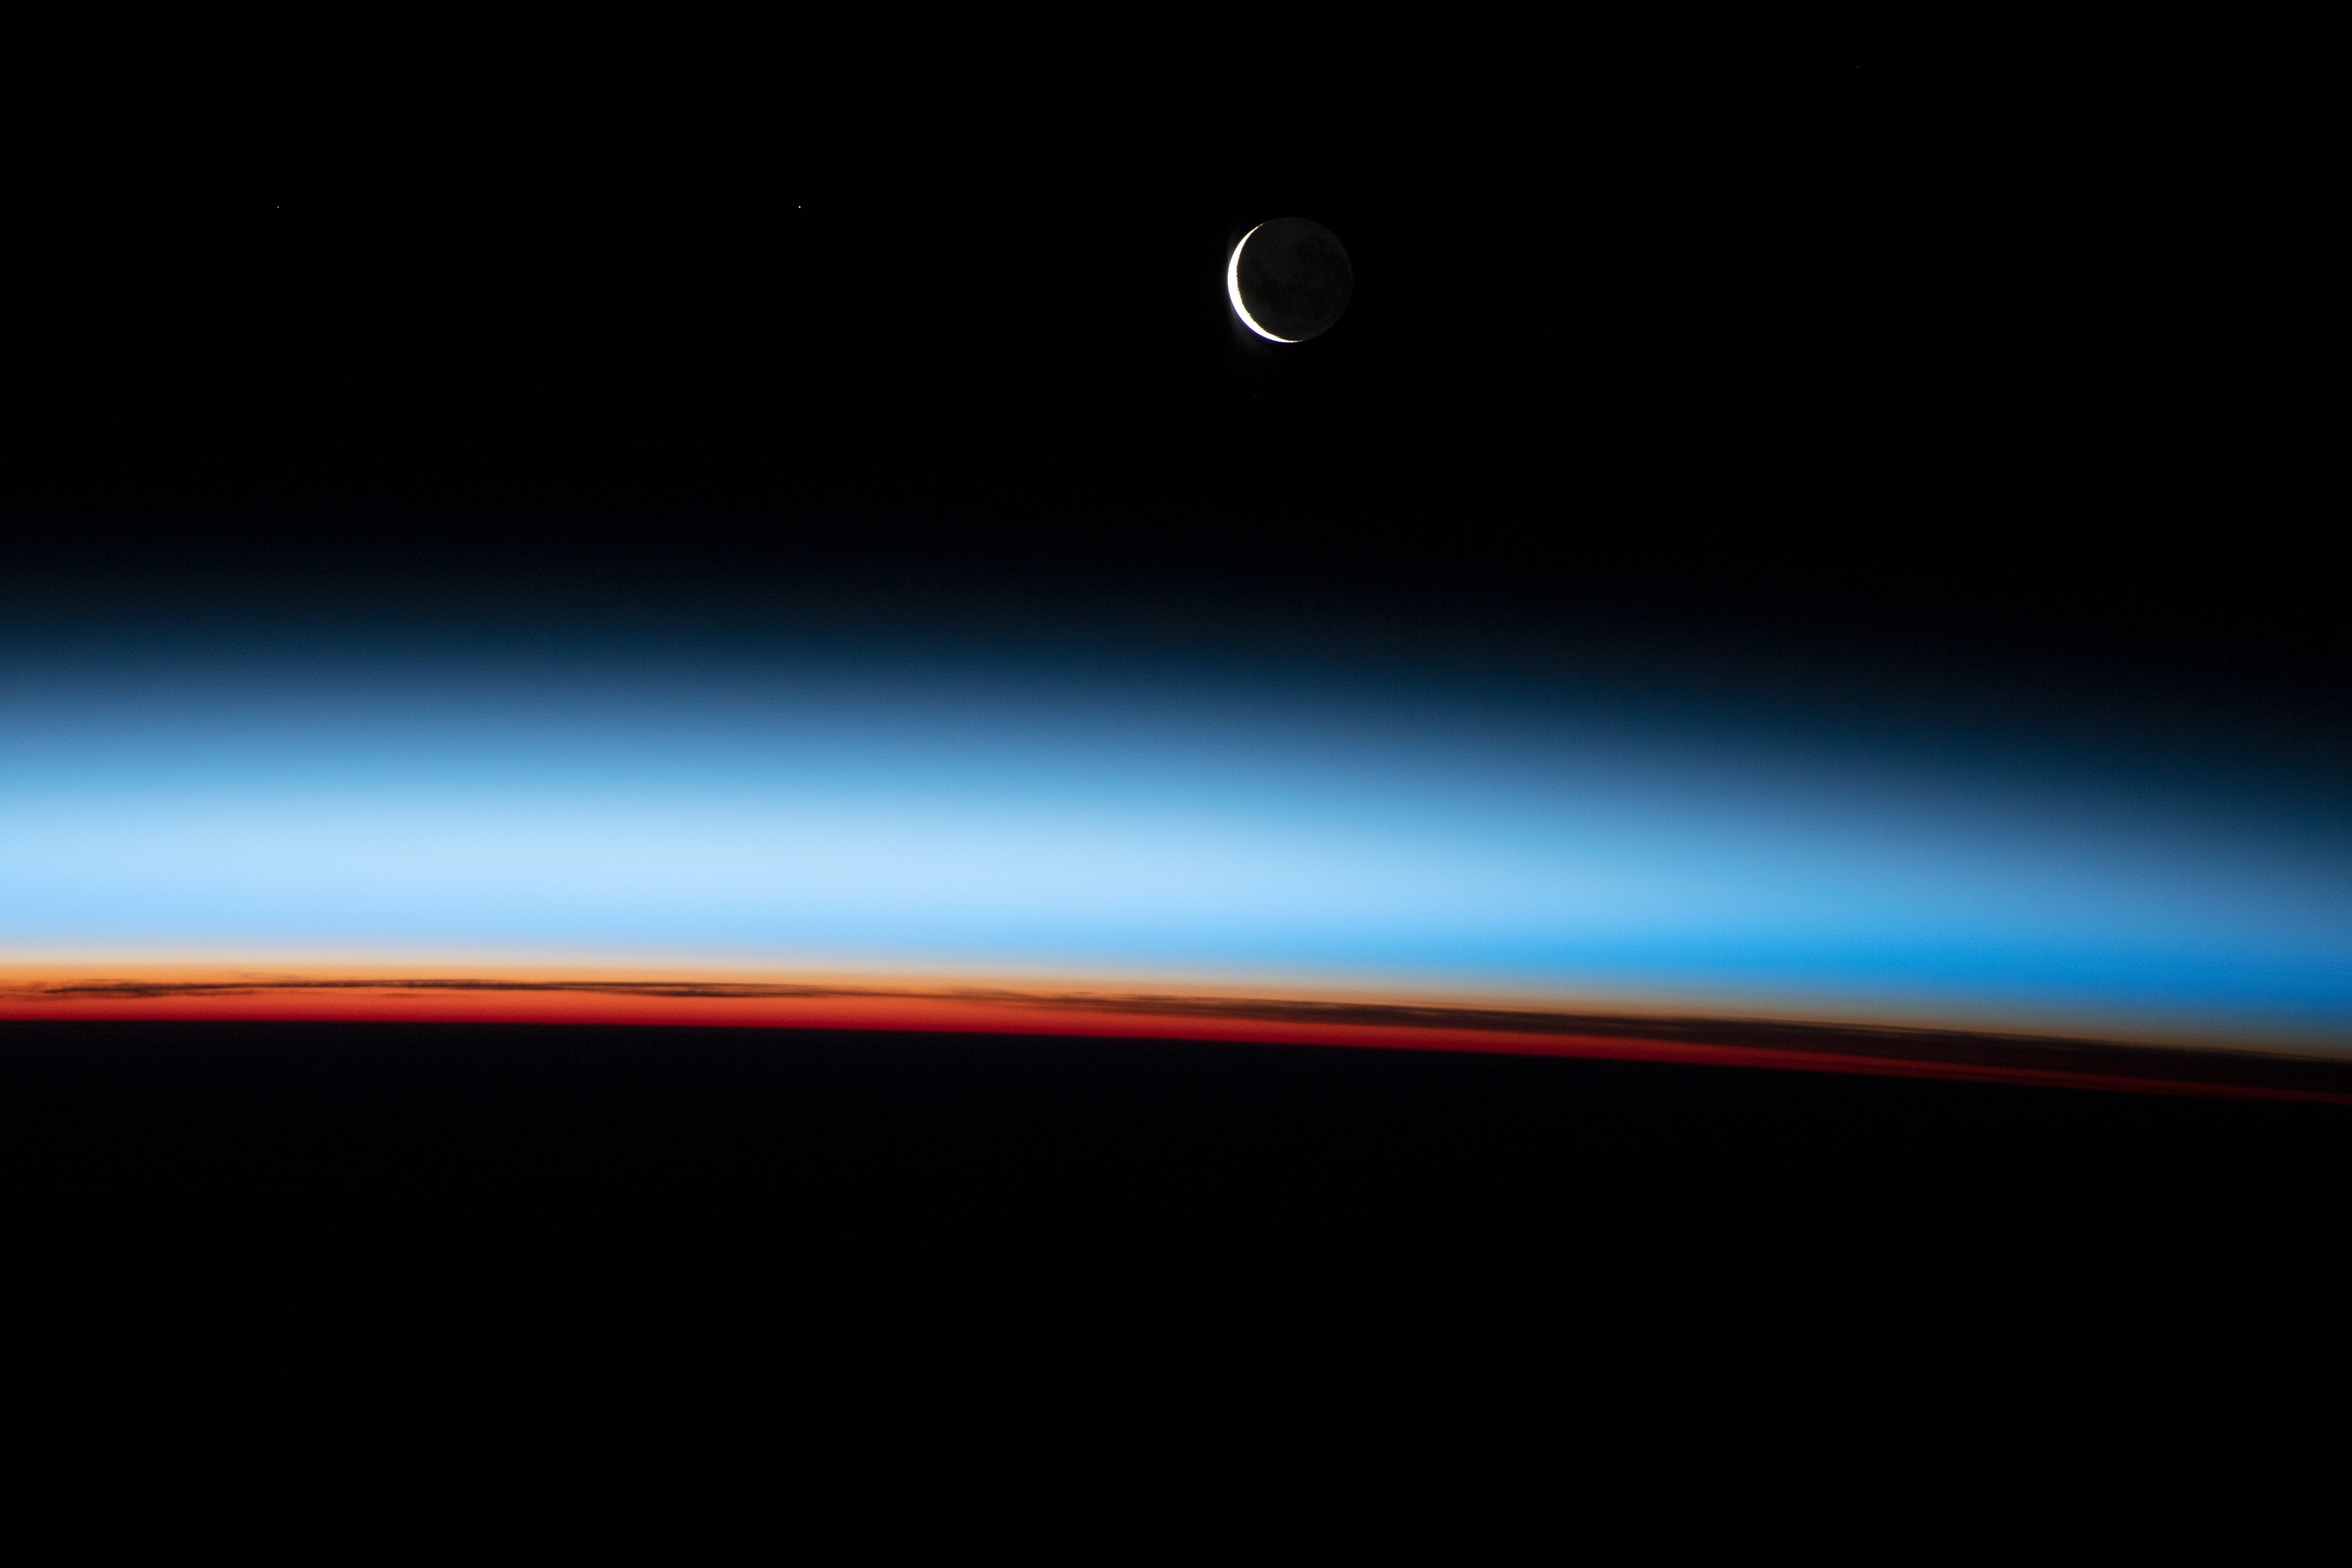 Earth’s Limb with a Crescent Moon - related image preview